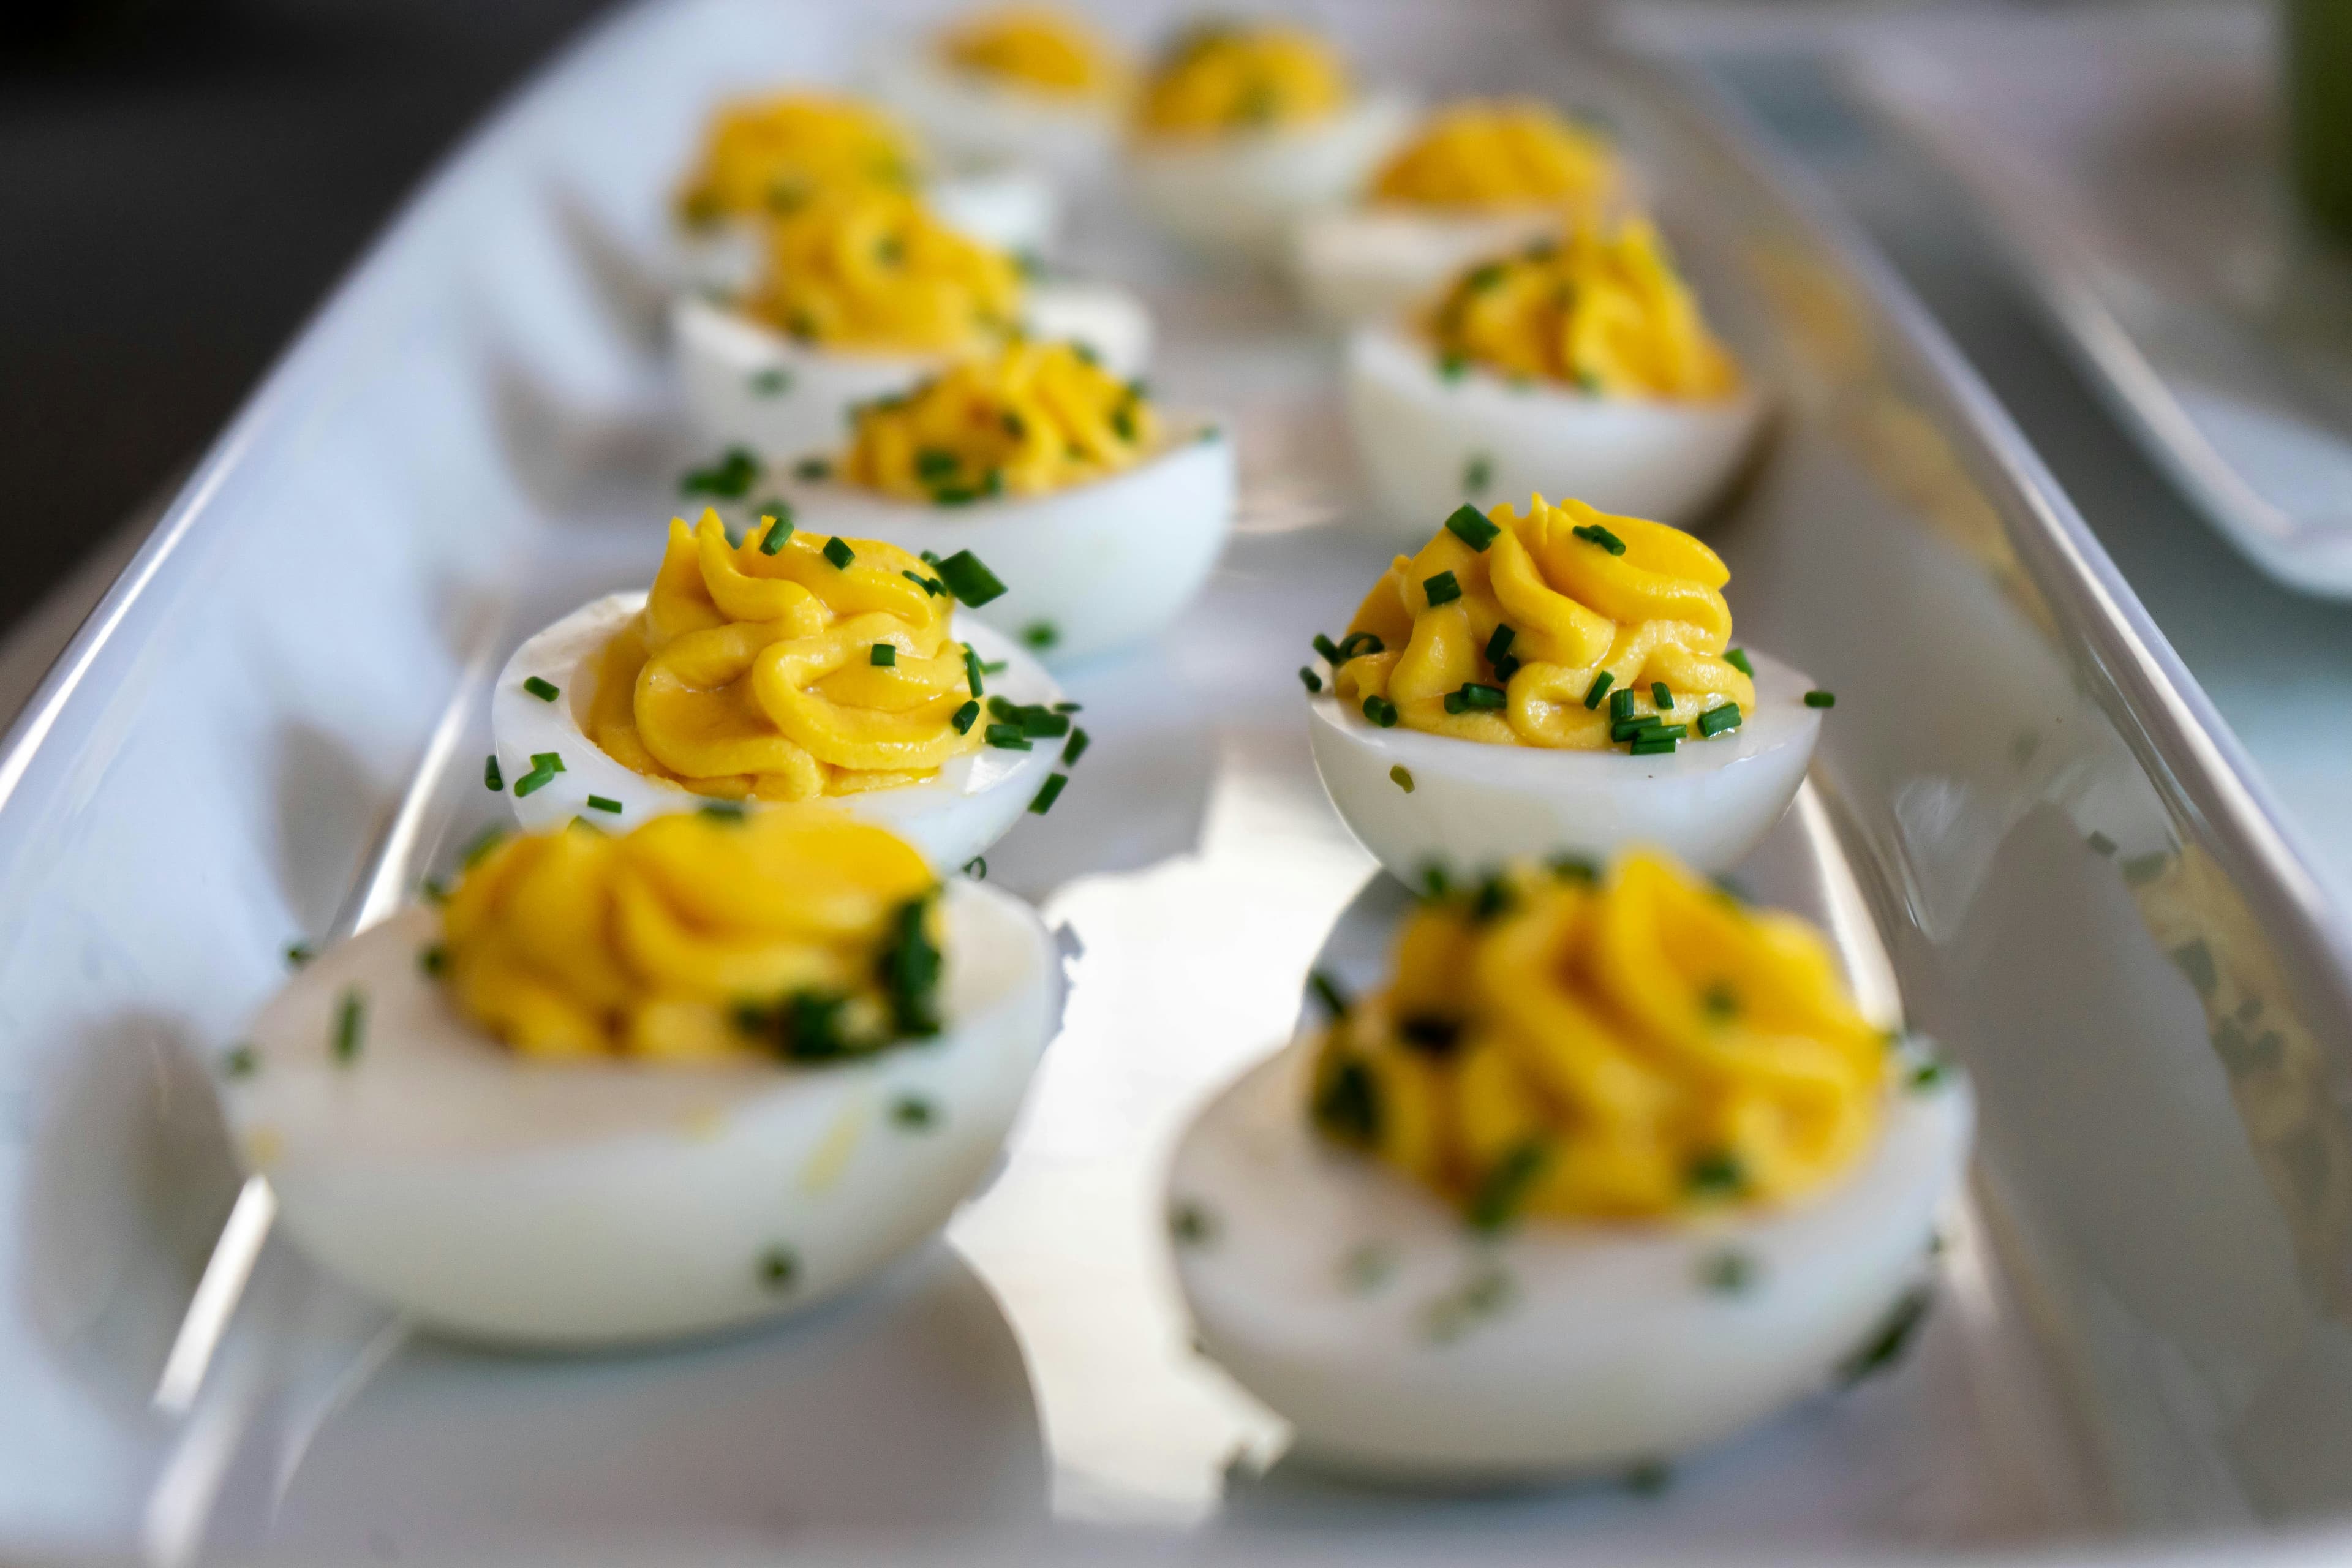 Global Flavours: Deviled Eggs Inspired by International Cuisine For Your Next Party